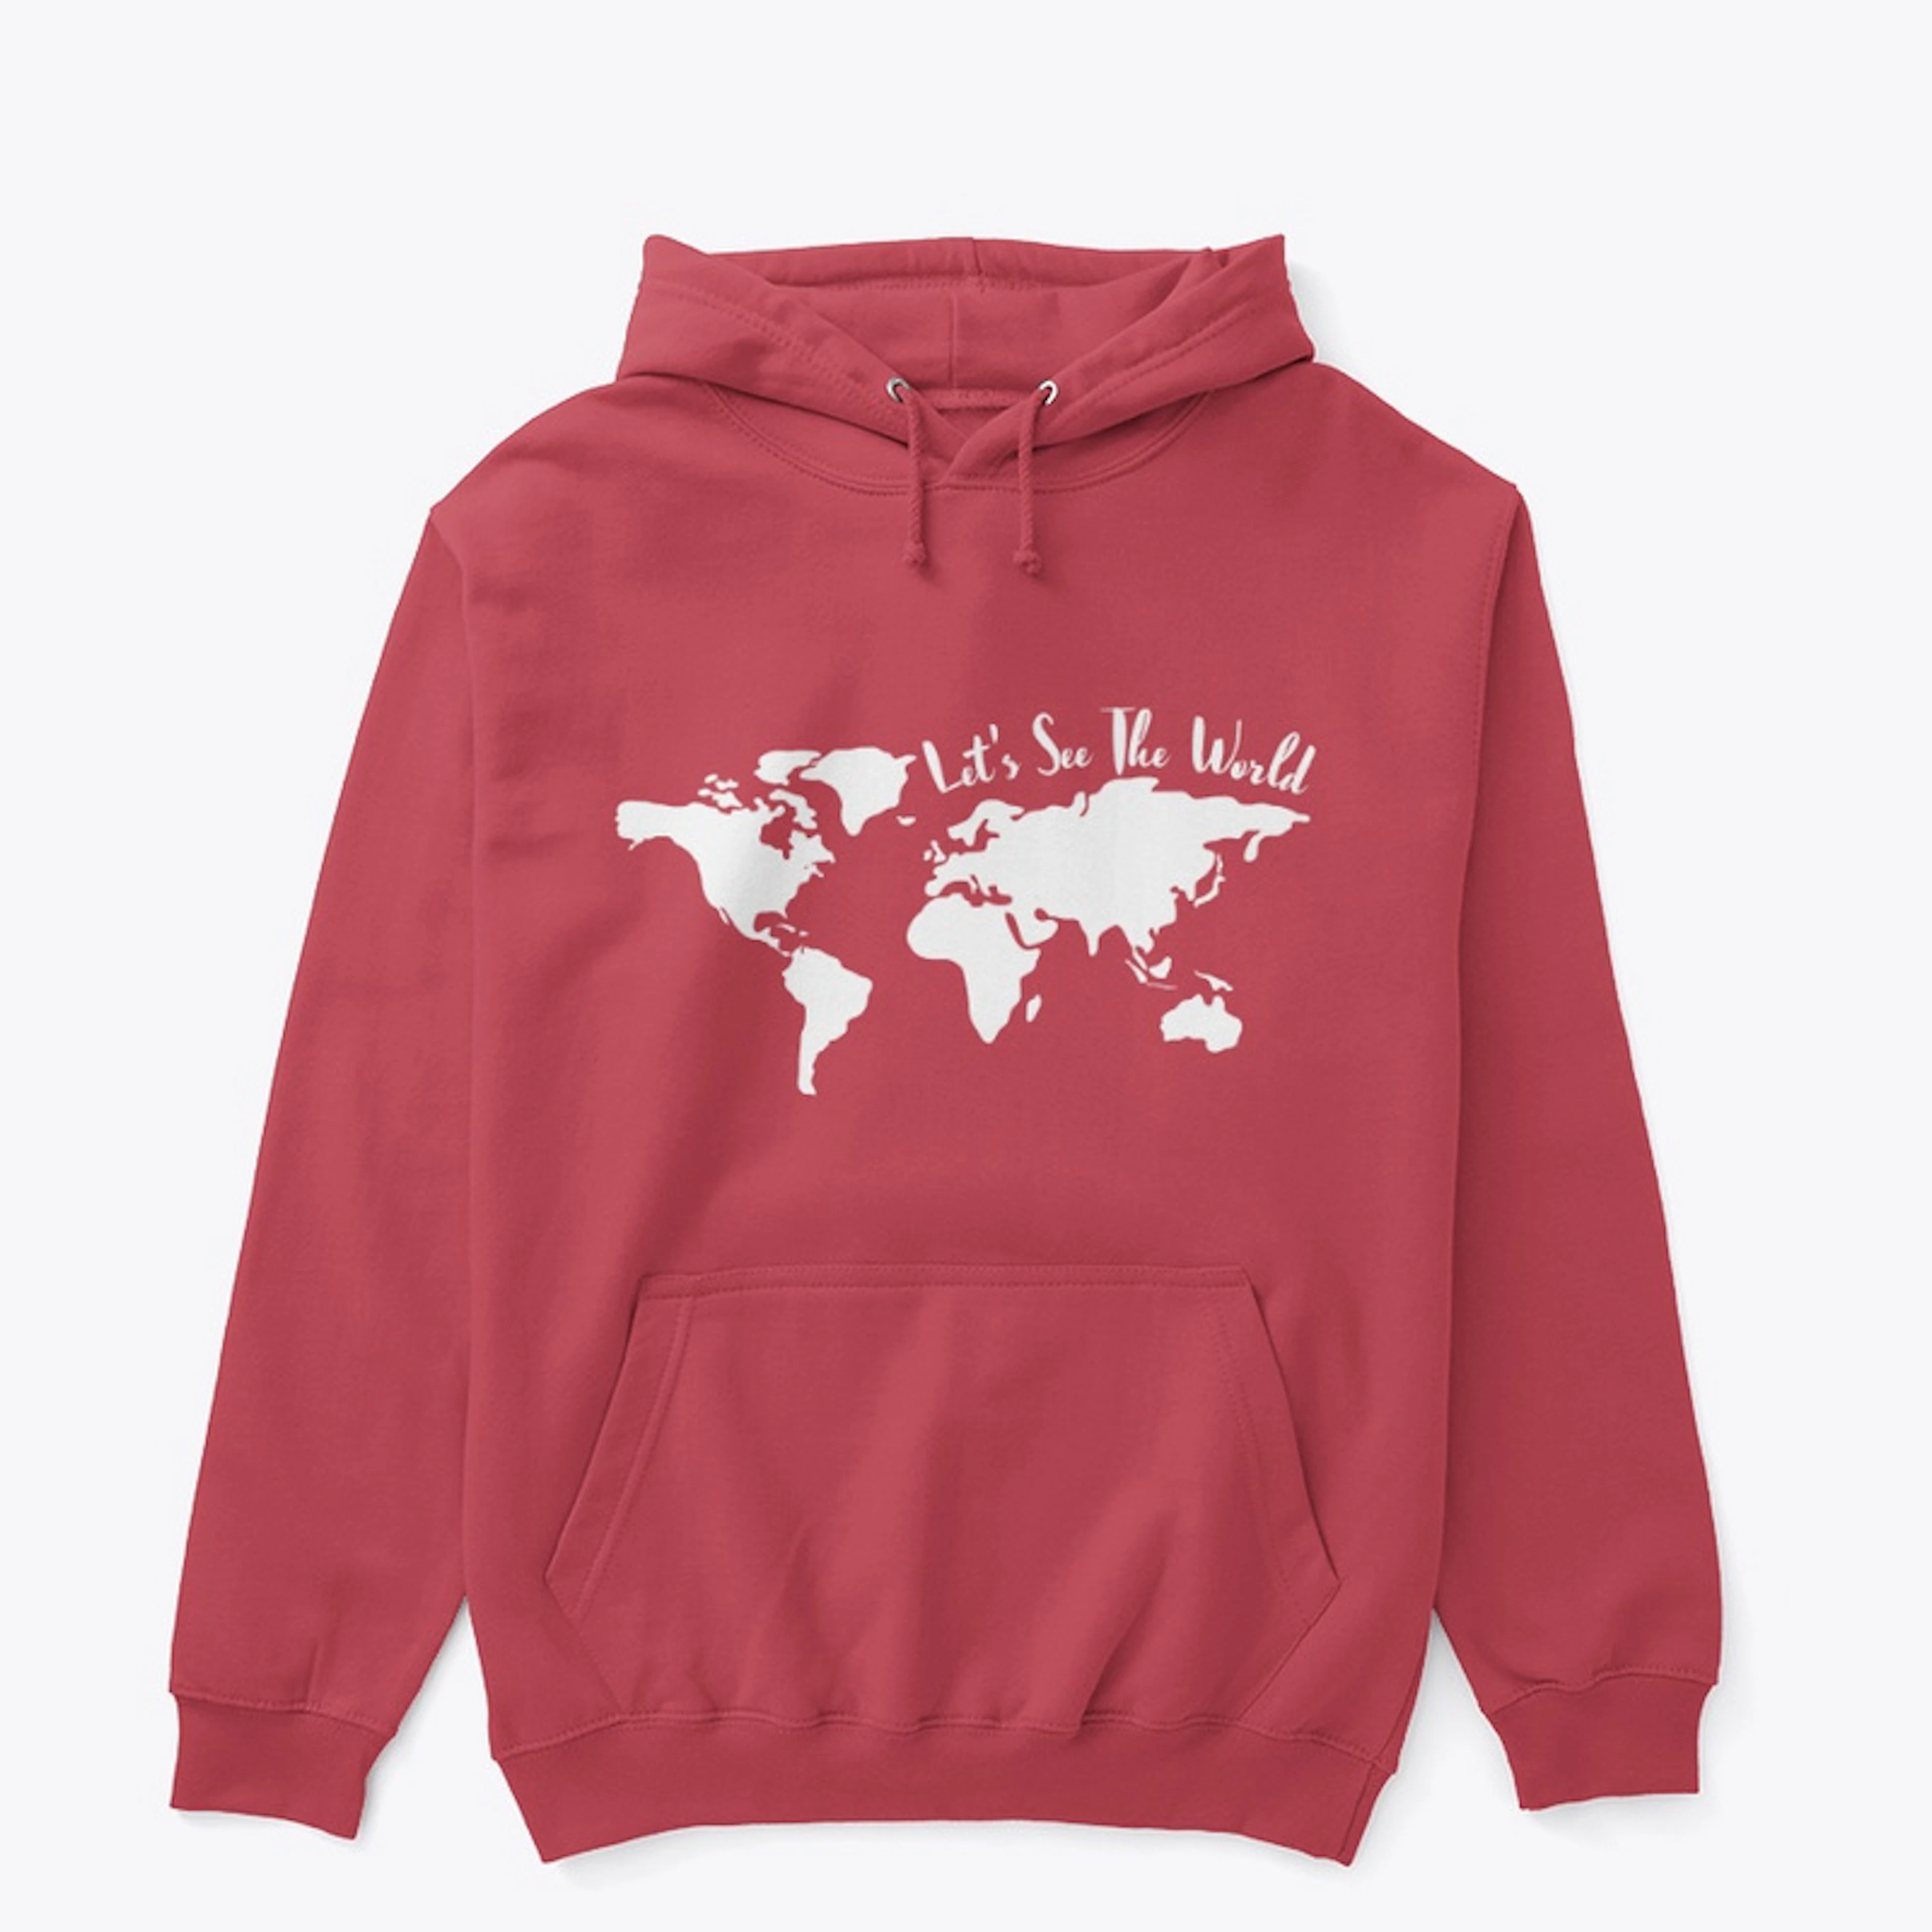 Let's See the World Hoodie